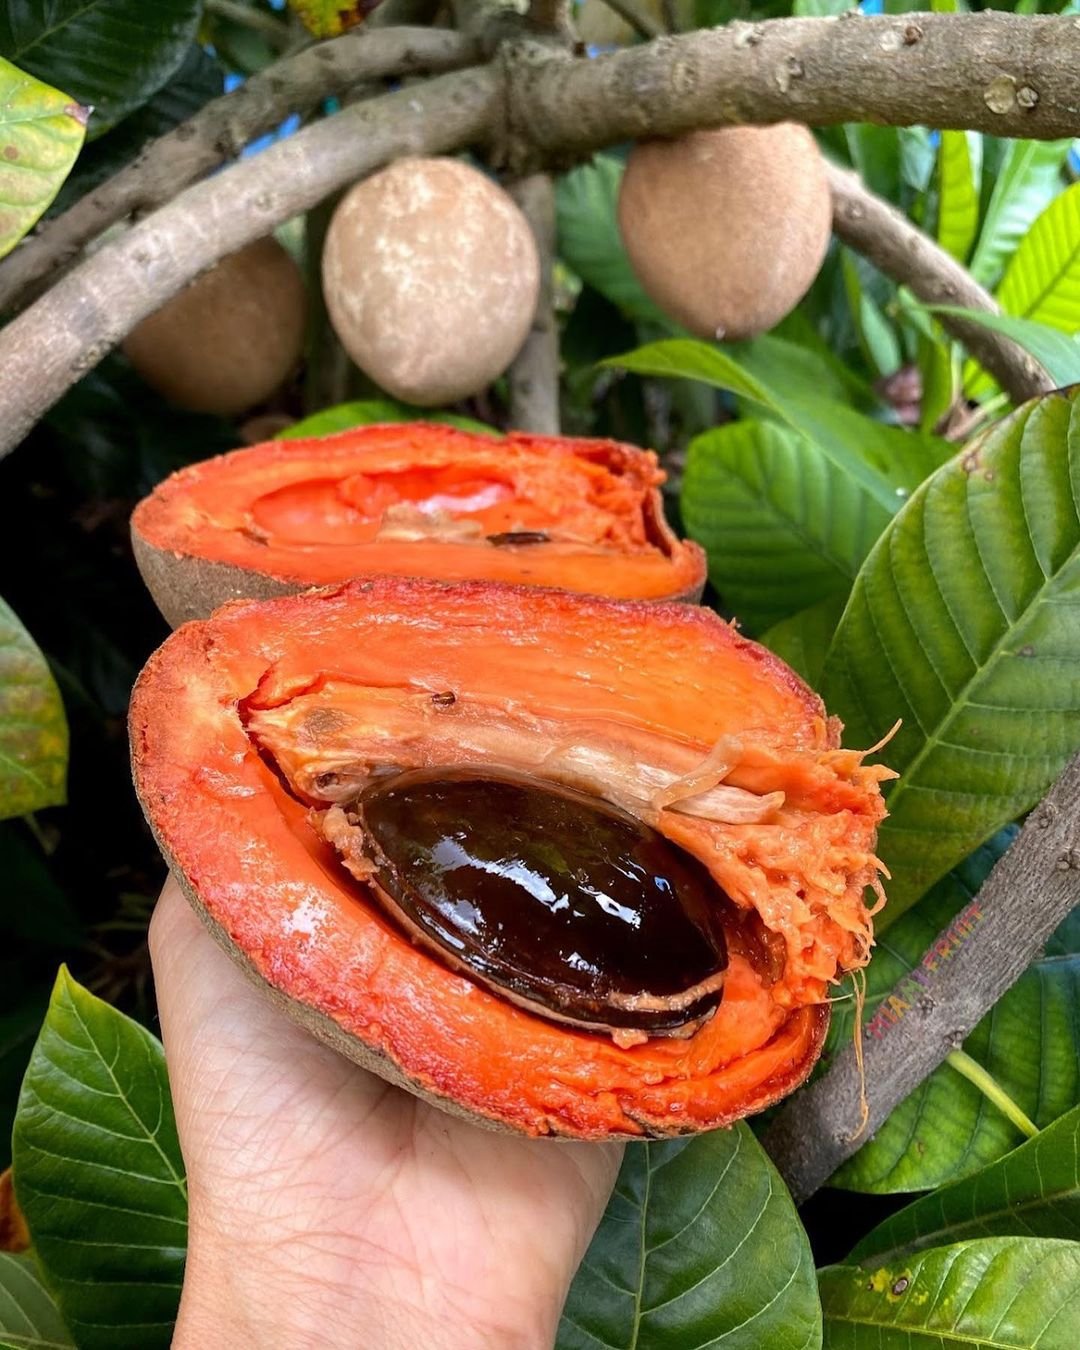 A Mamey Sapote fruit being held by an individual.